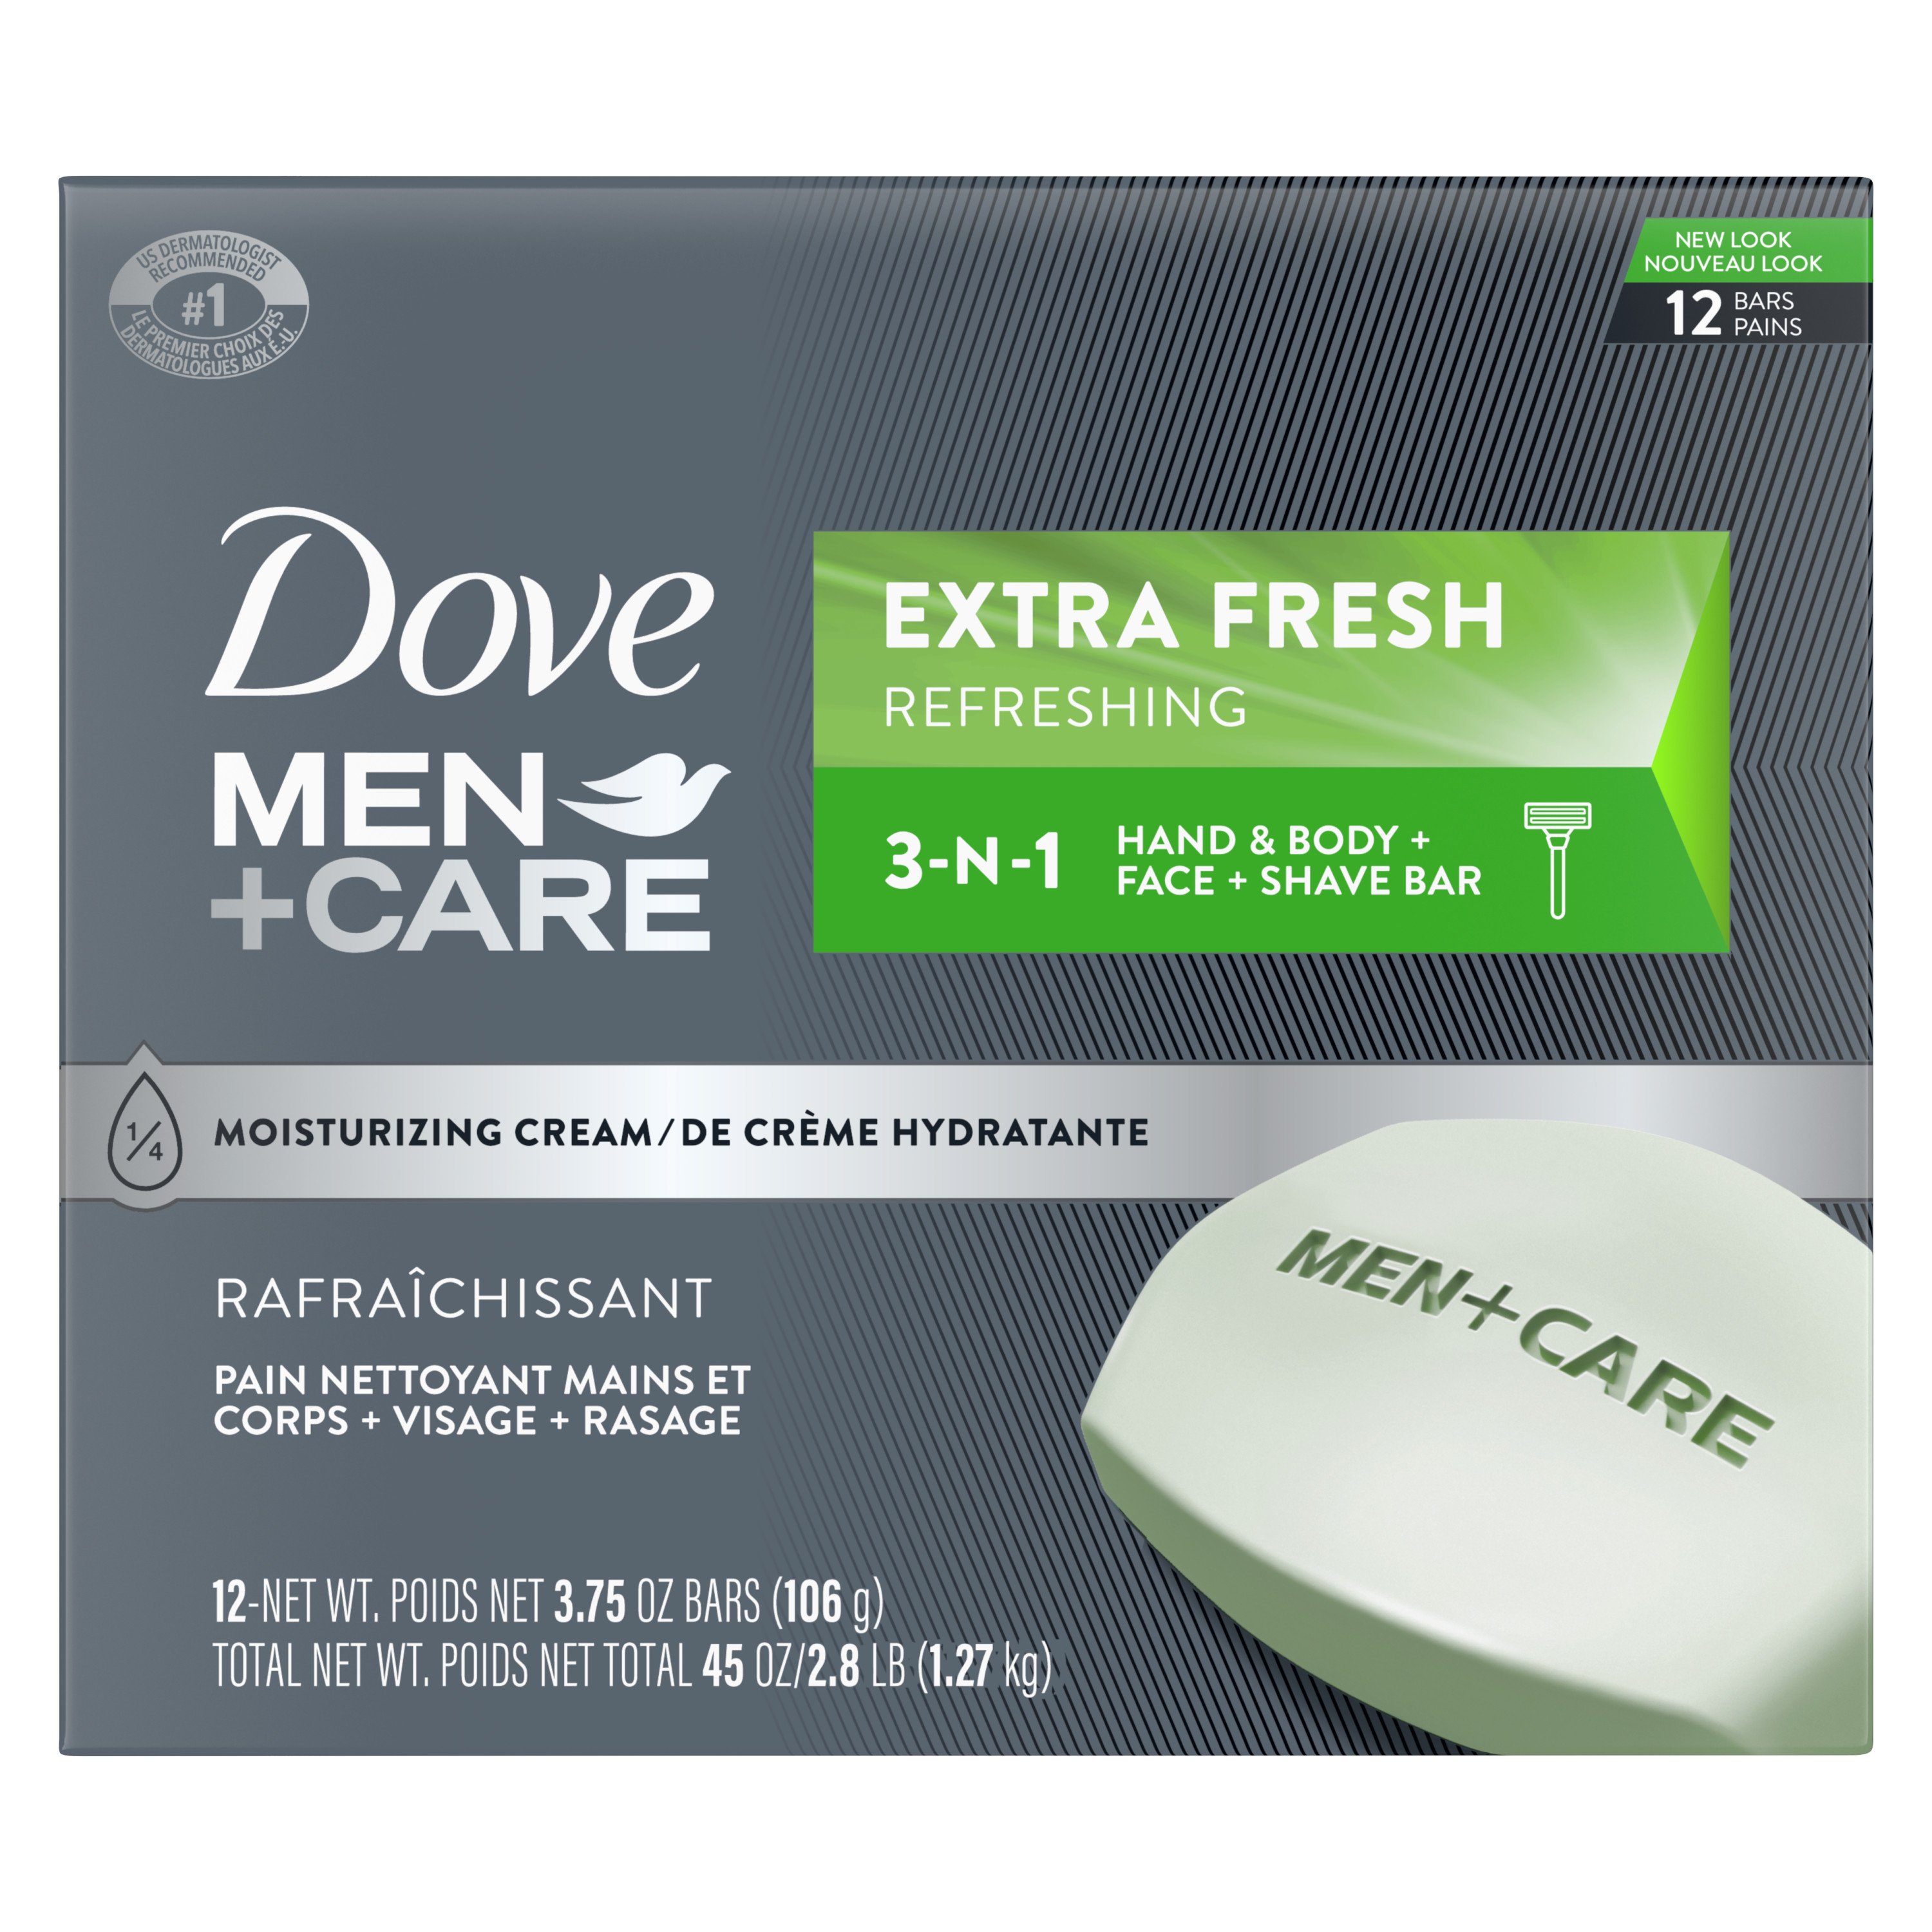 Dove Men+Care Body and Face Bar, Deep Clean - 4 oz, 6 count